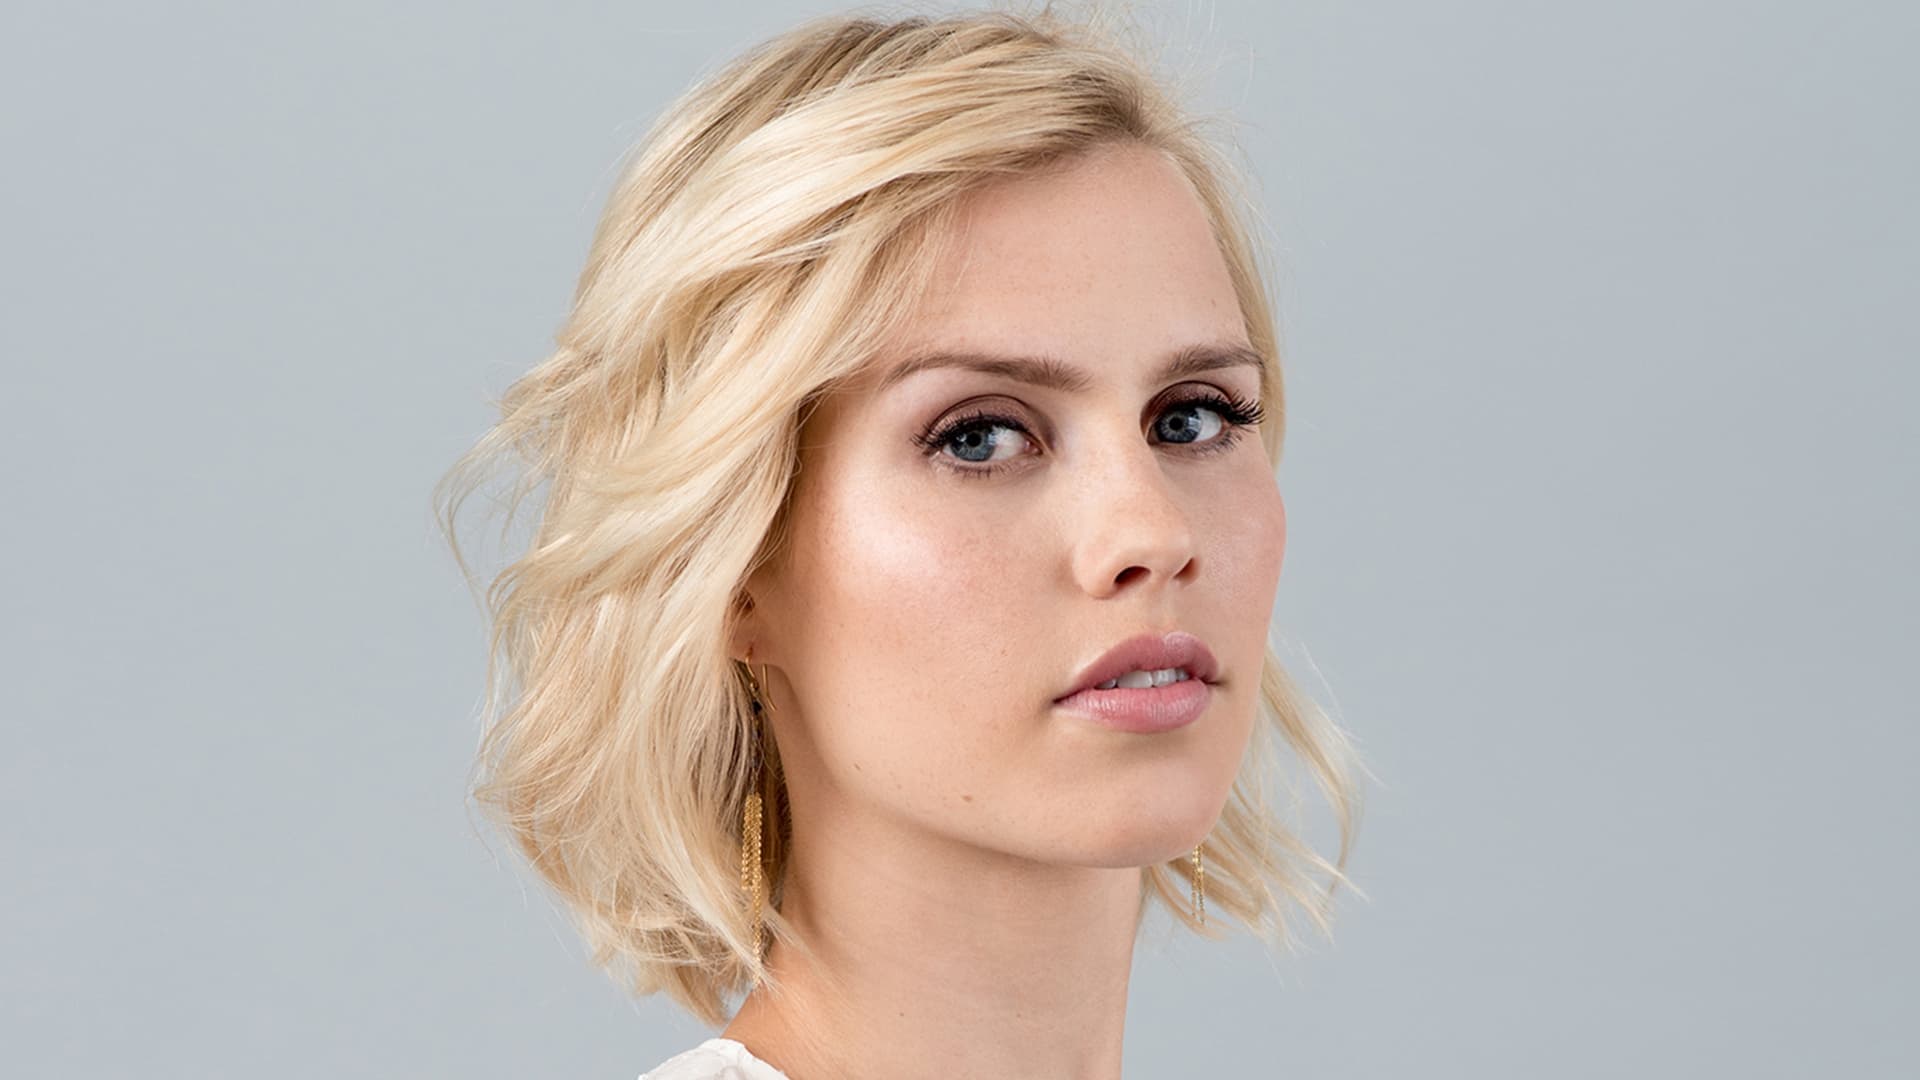 Claire Holt Wallpaper 8 1920 X 1080 Stmed - Claire Holt , HD Wallpaper & Backgrounds